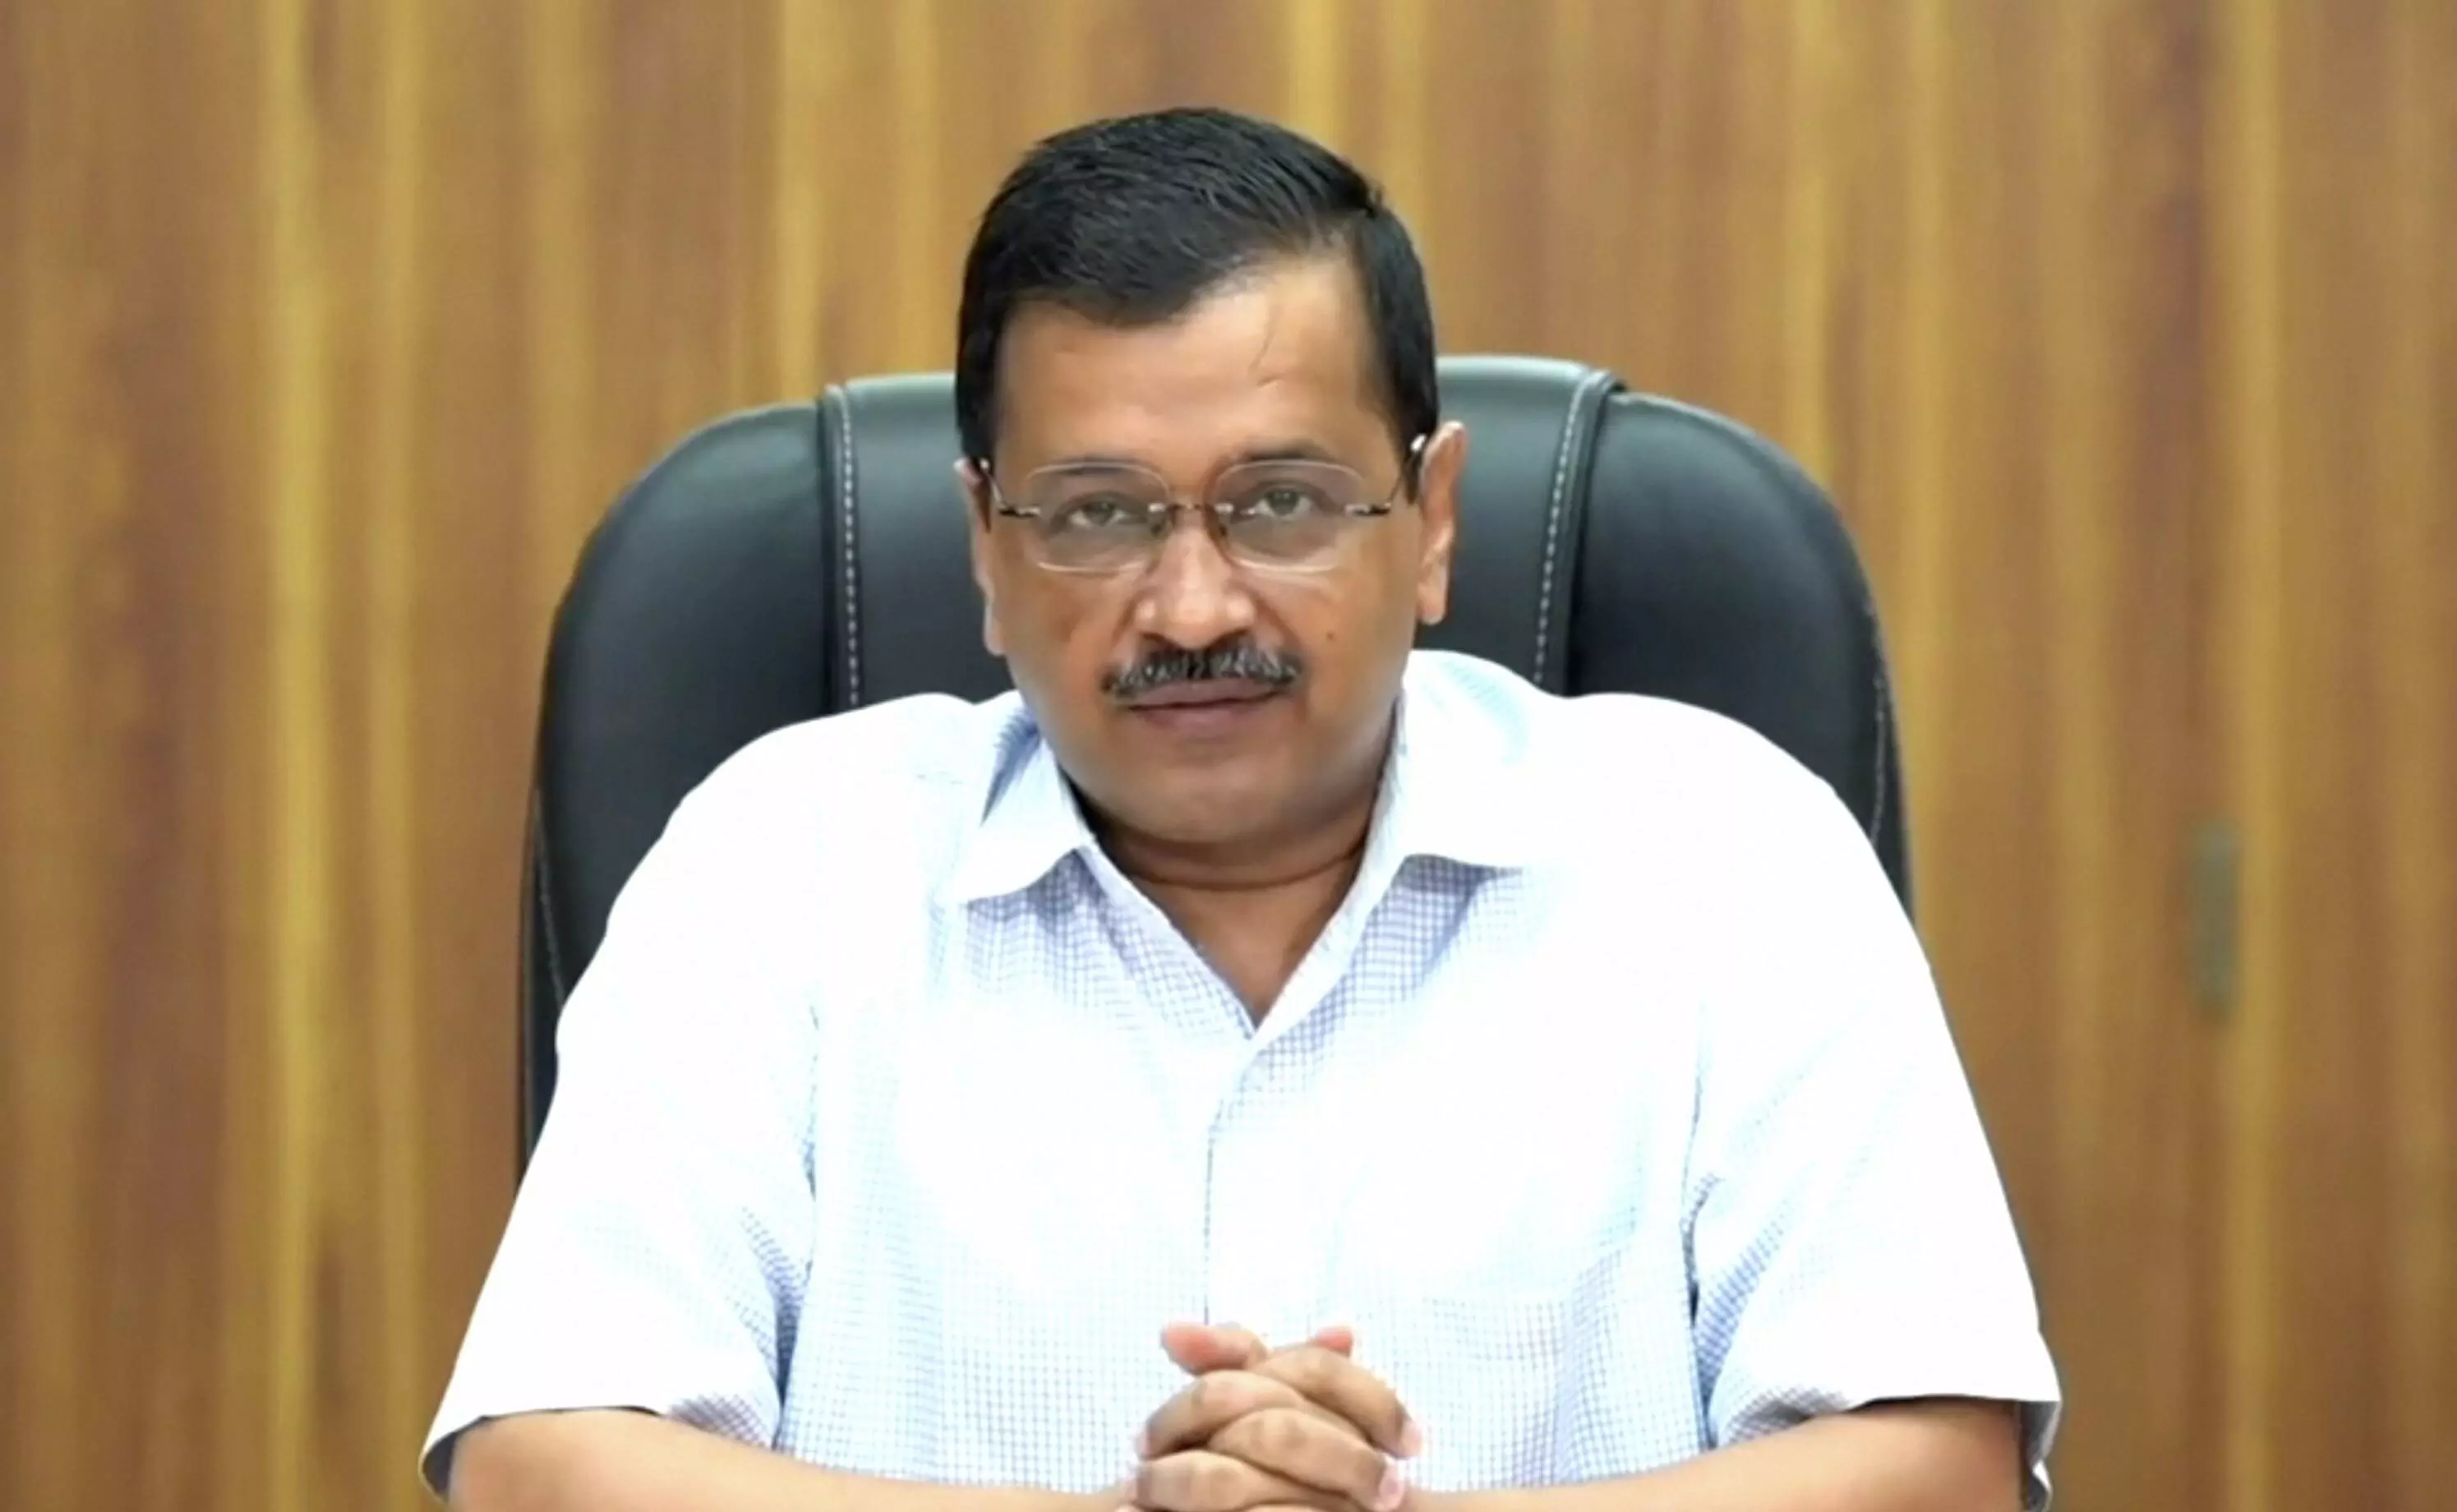 Delhi excise policy: ED summons CM Arvind Kejriwal for questioning on November 2